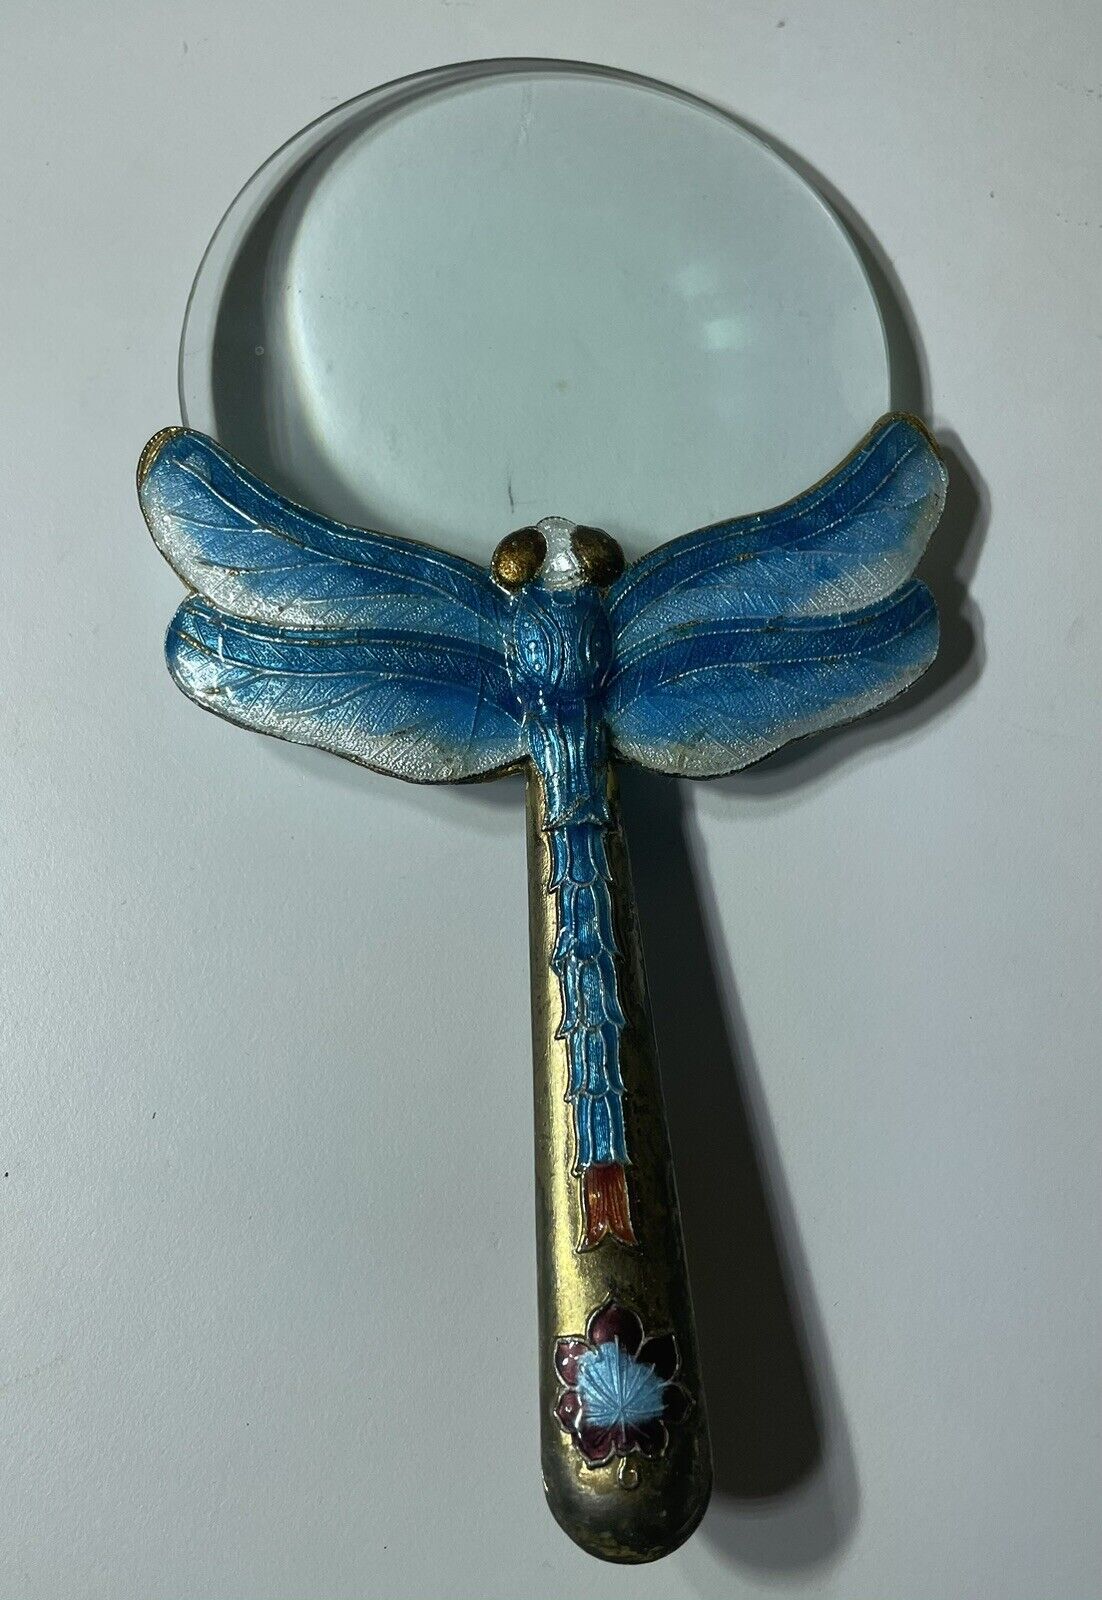 Chinese Cloisonné Enamel Metal Blue Dragonfly Magnifier Magnifying Glass